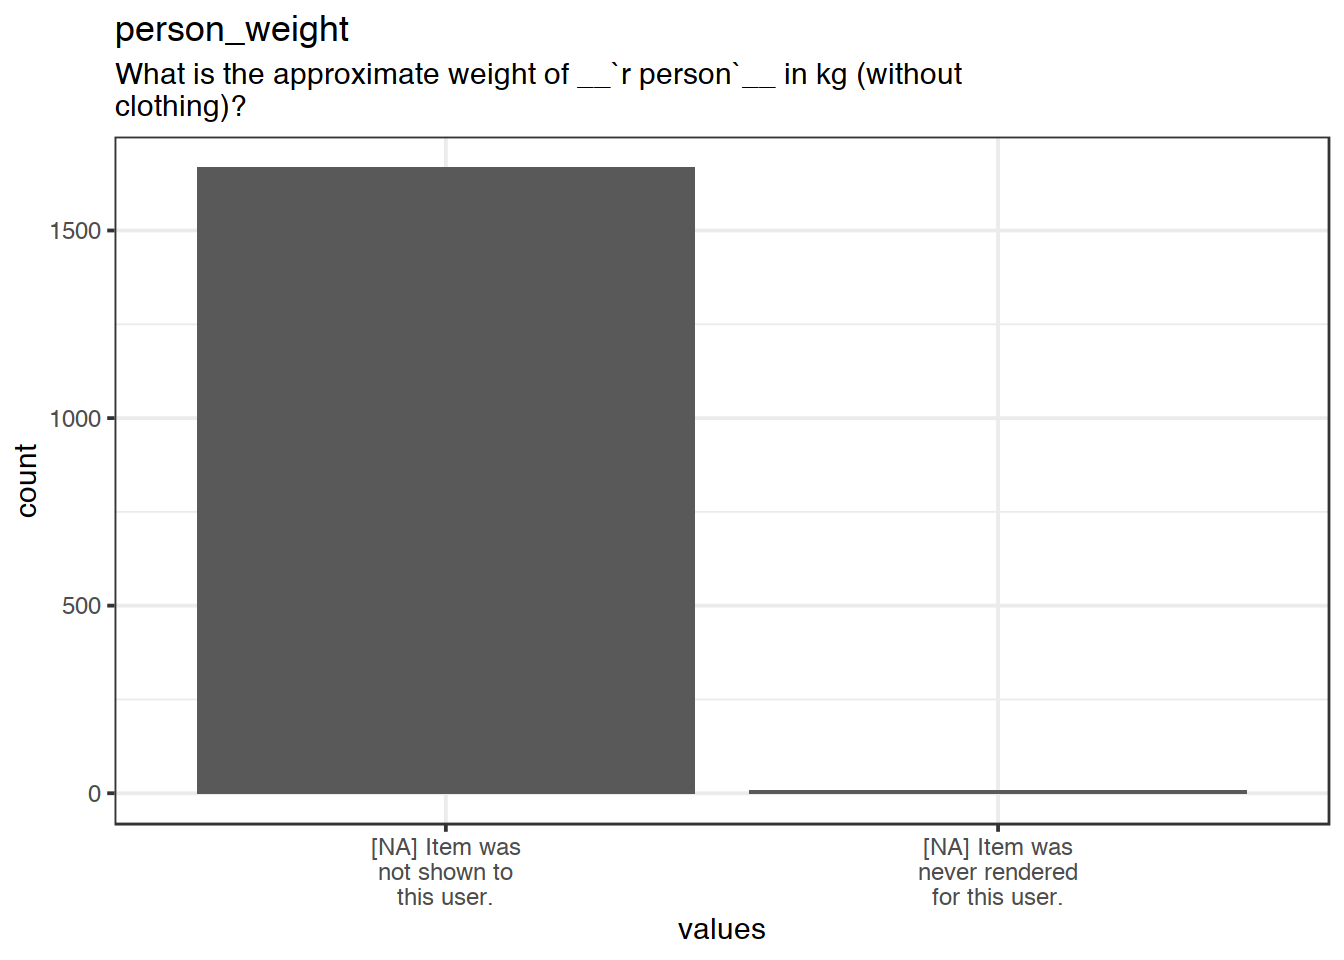 Plot of missing values for person_weight